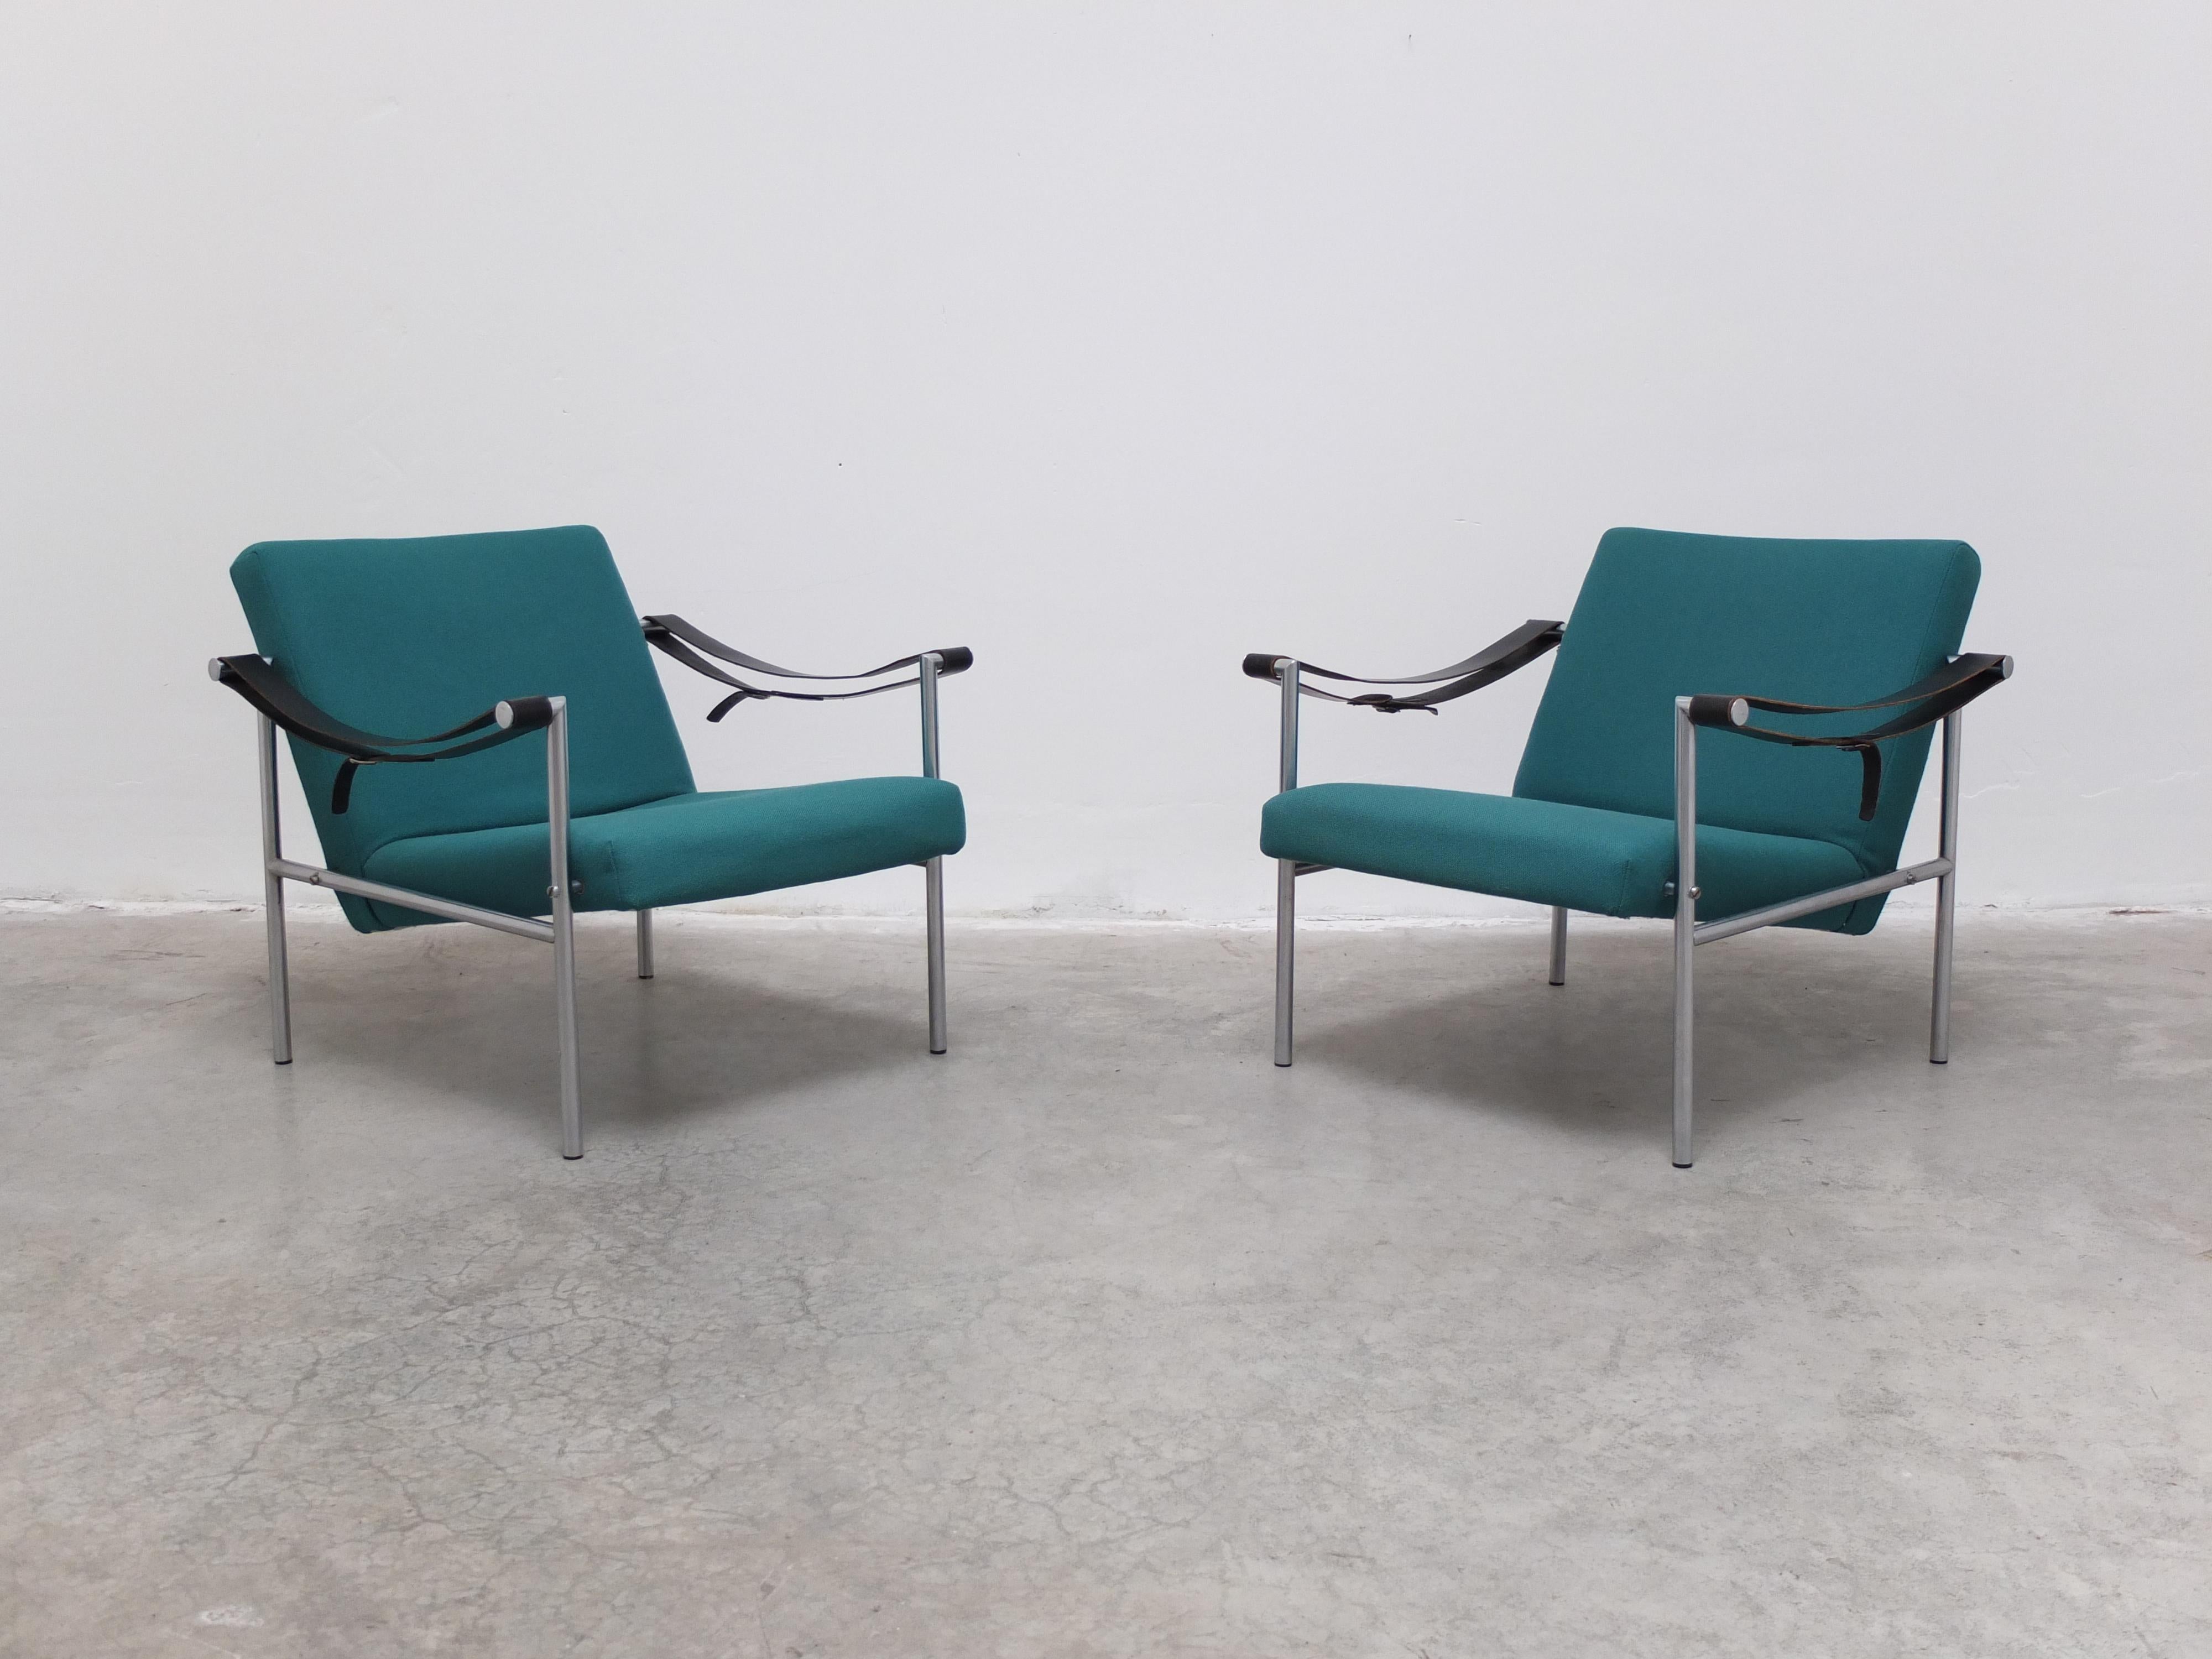 Pair of 'SZ08' Lounge Chairs by Martin Visser for 't Spectrum, 1960 For Sale 4